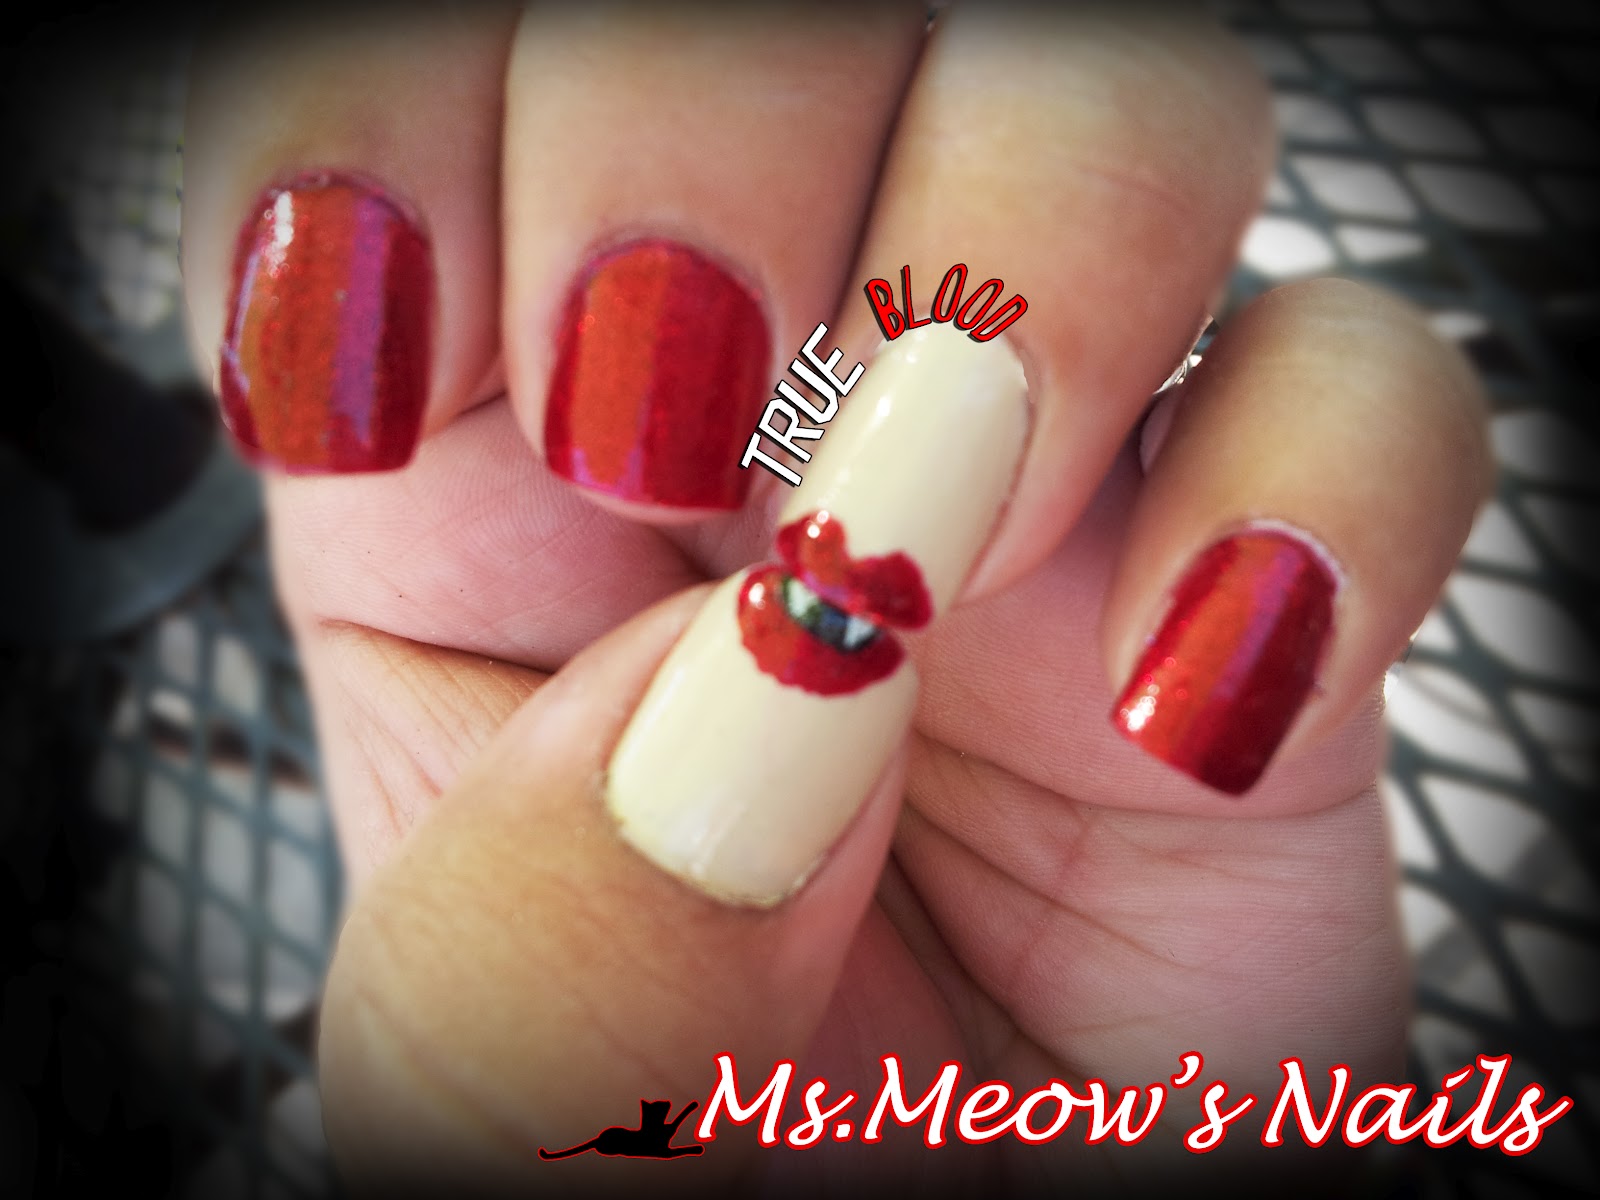 Ms.Meow's Nails: True Blood inspired mani